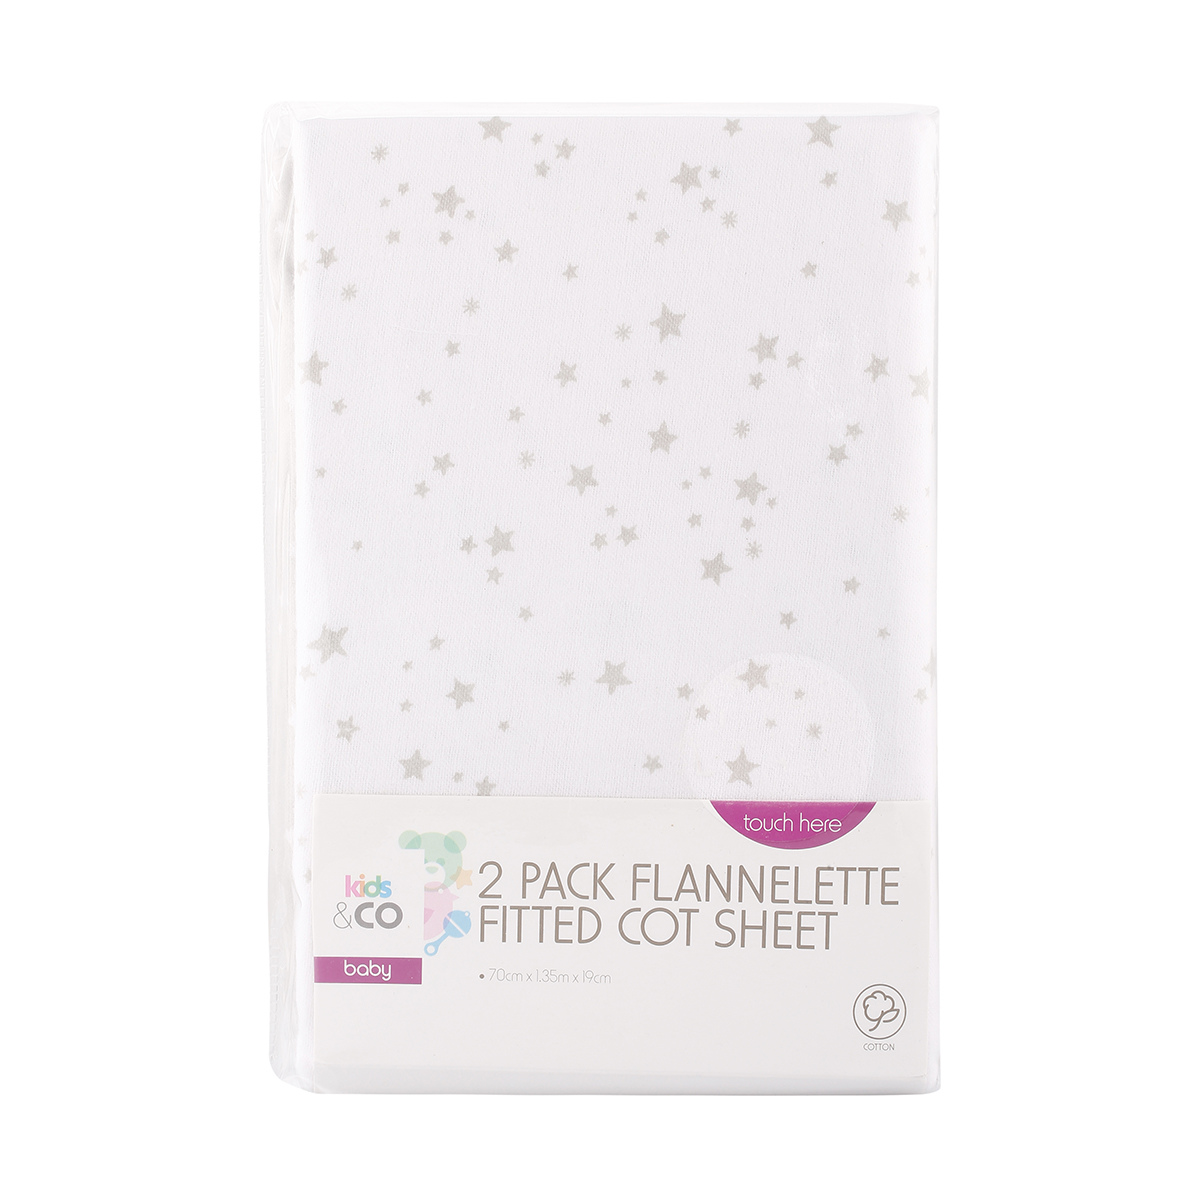 2 Pack Flannelette Fitted Cot Sheet - Stars